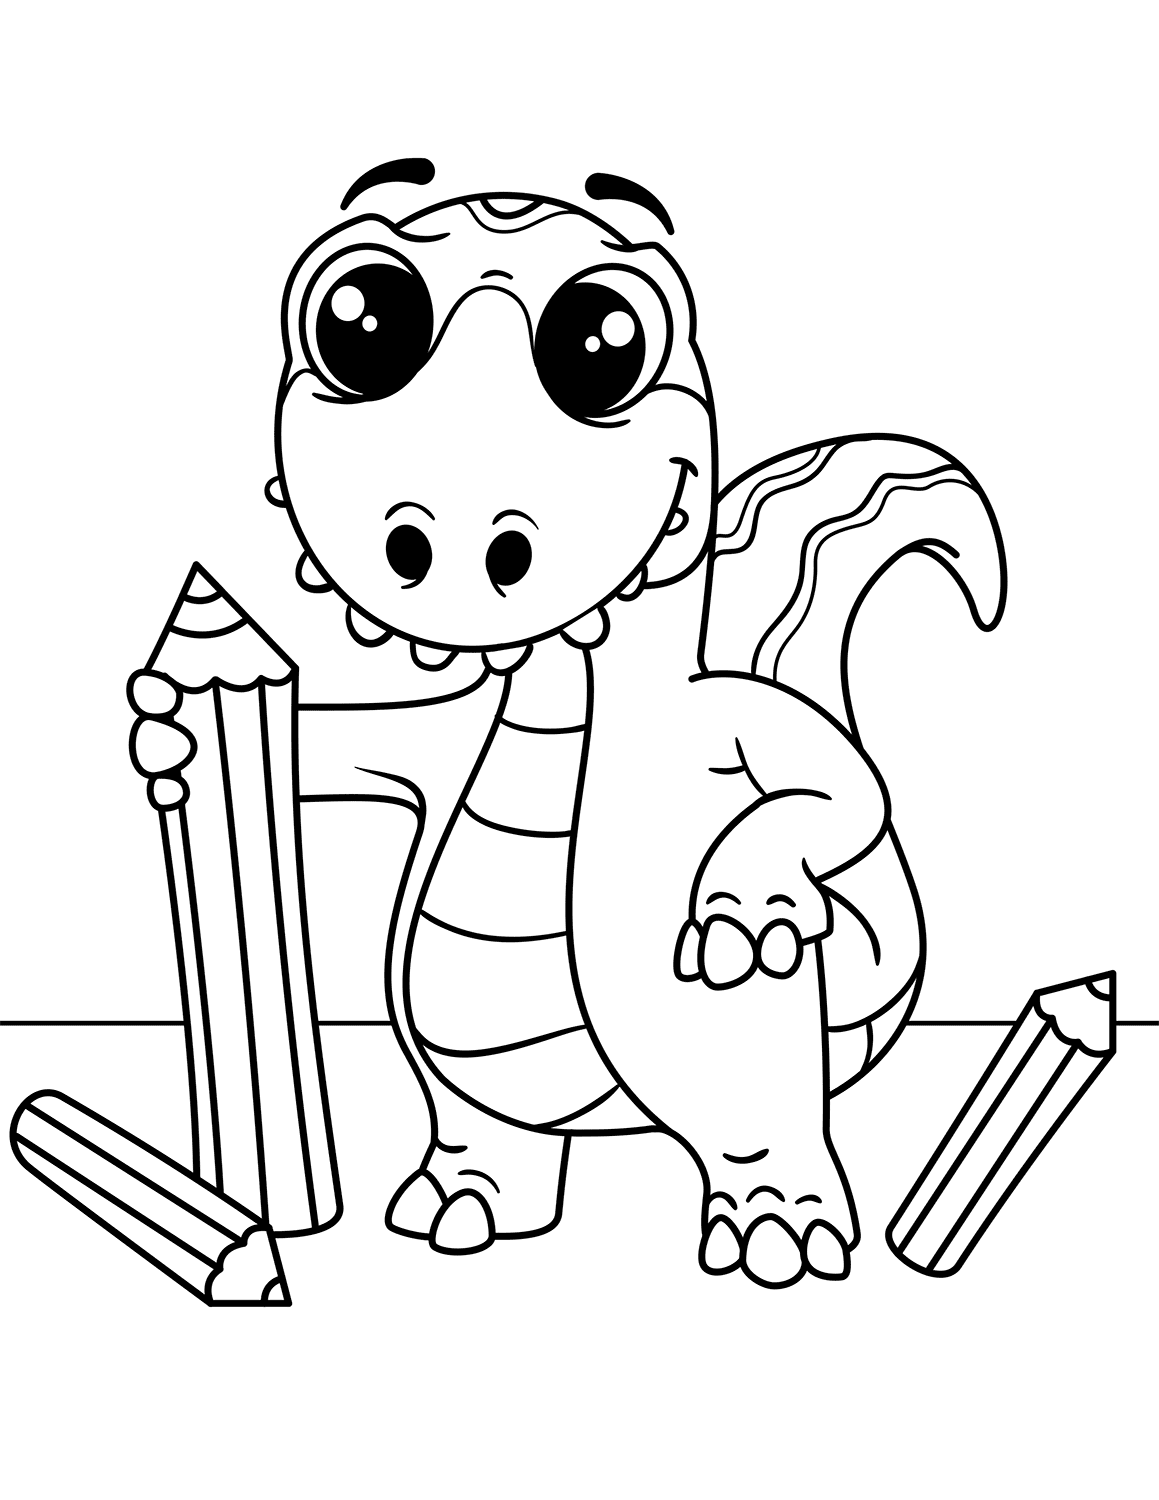 Baby Dinosaur With Pencils Coloring Page - Free Printable Coloring